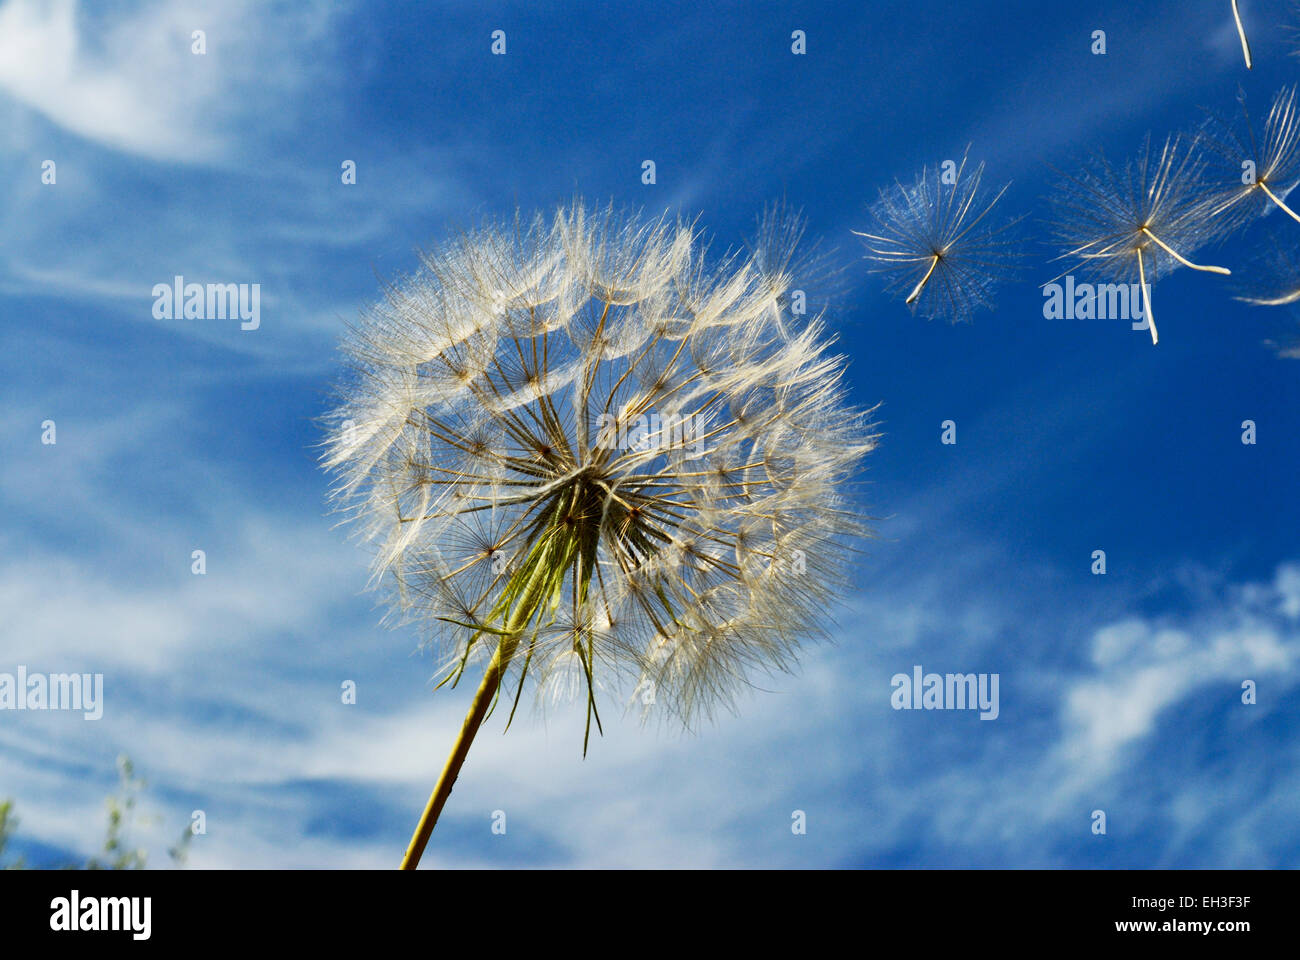 Dandelion seed head and seeds blowing in the wind against blue sky Stock Photo